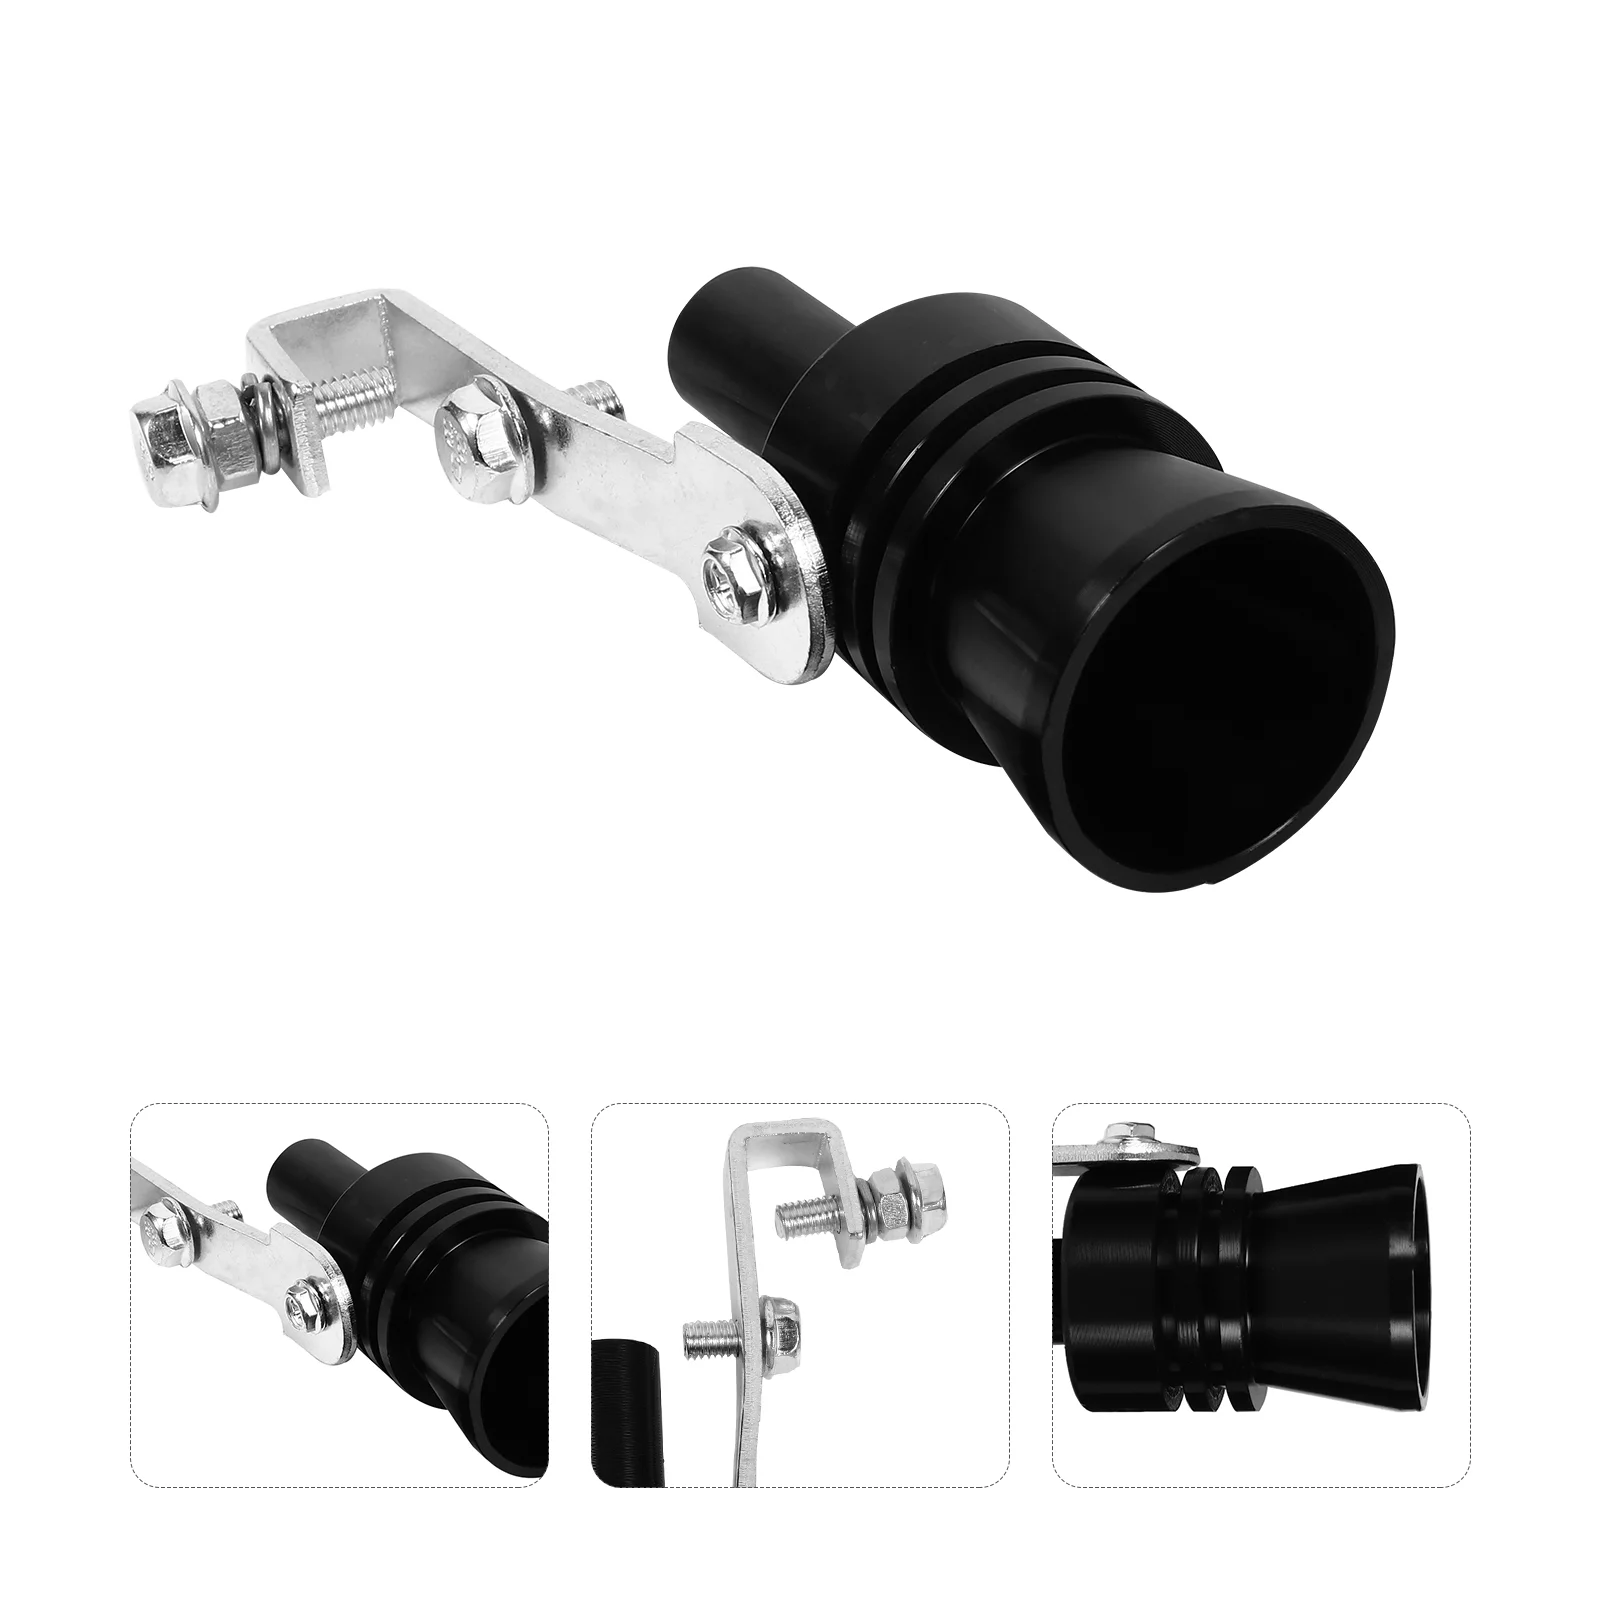 

Car Sound Whistle Exhaust Muffler Tail Pipe Whistle Exhaust Pipe Sounder (Black)